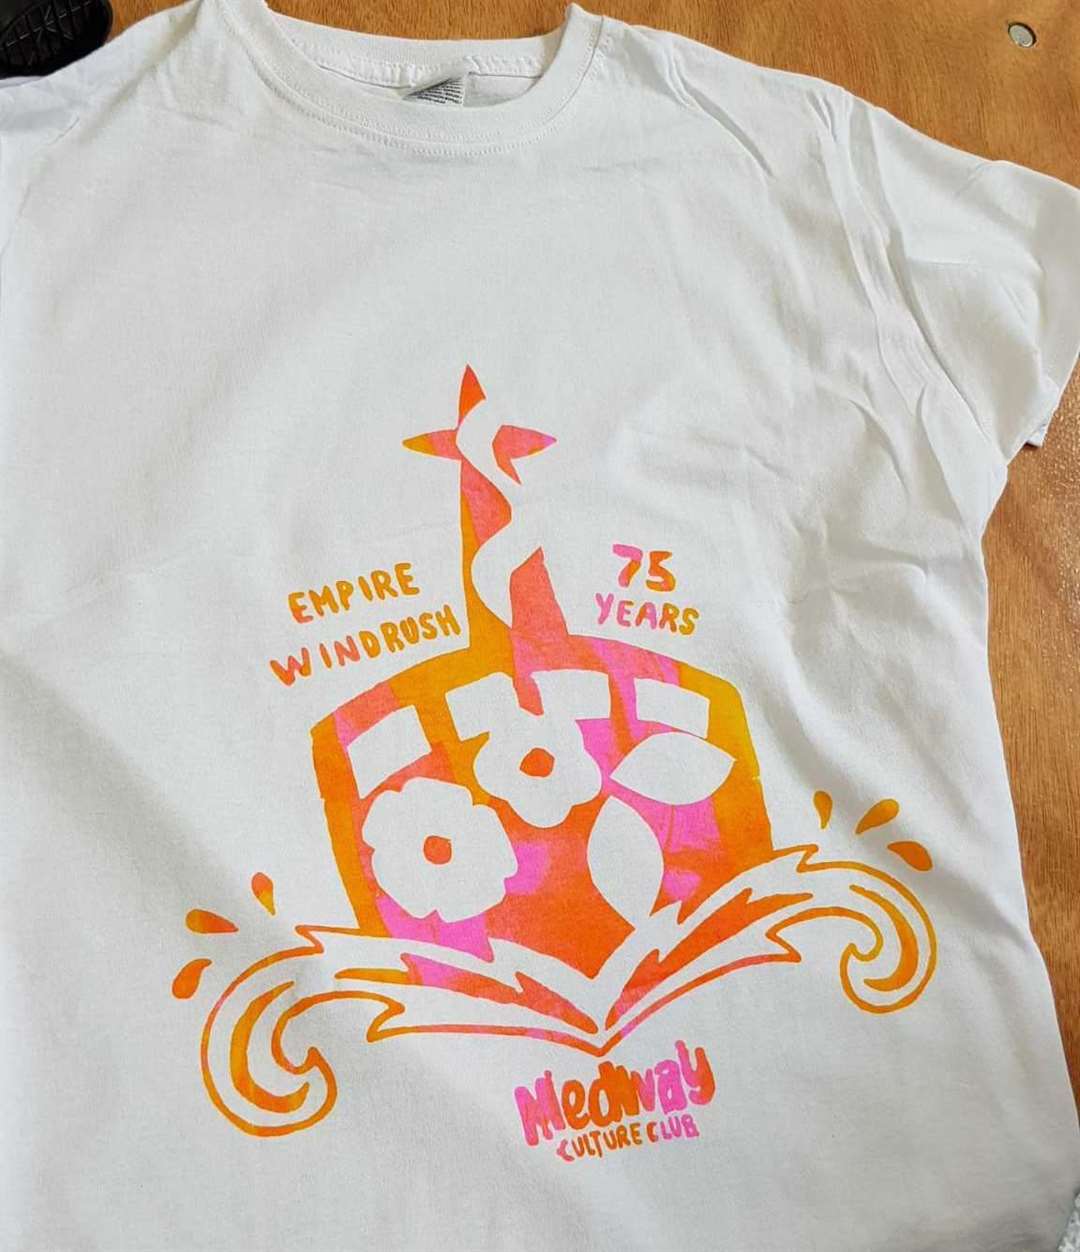 T-shirts created by the young people to wear during the procession